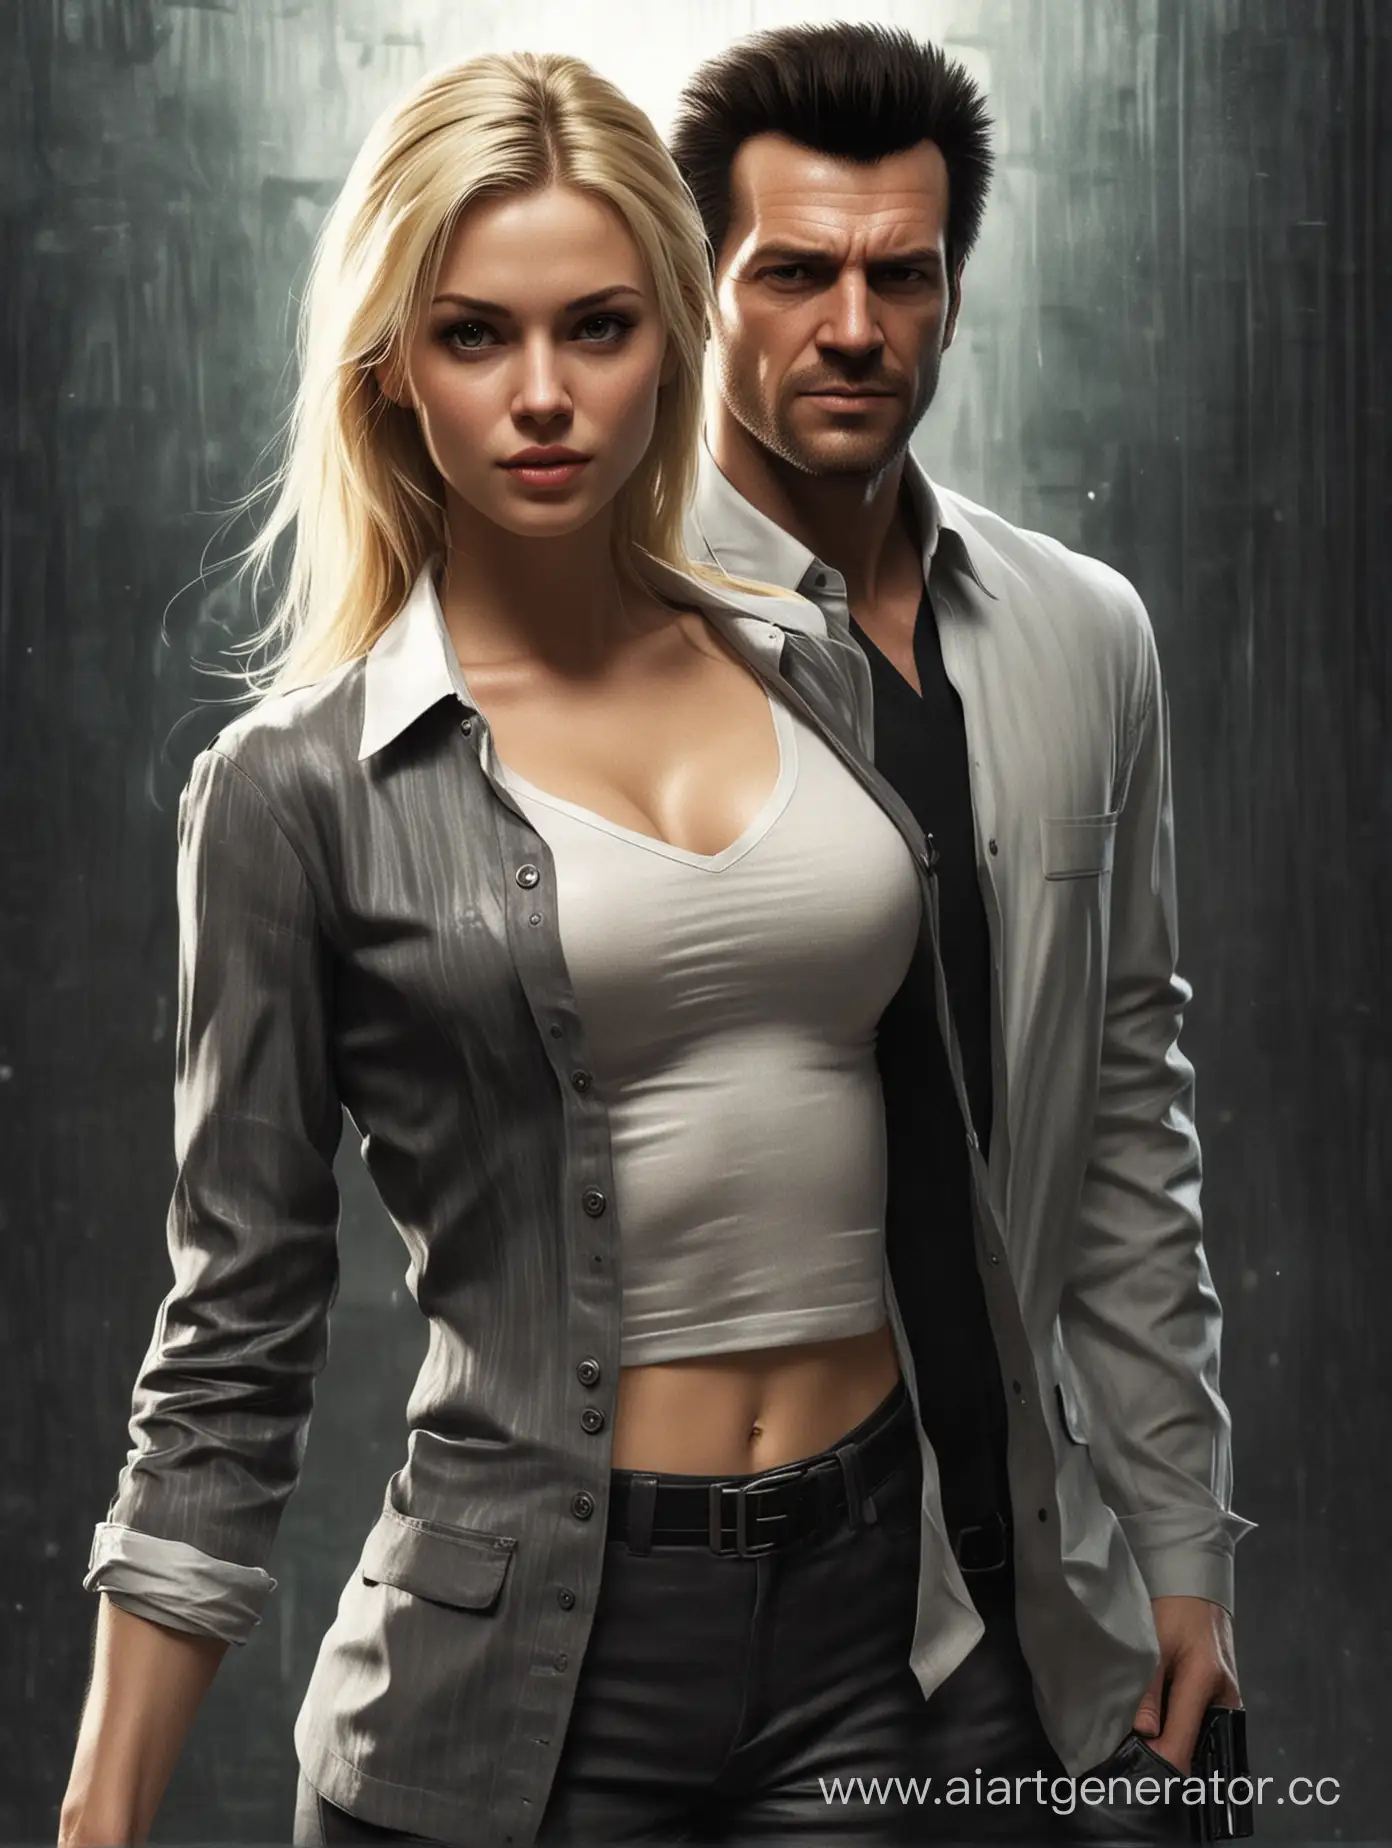 Max-Payne-and-Blonde-Girl-in-Intense-Action-Scene